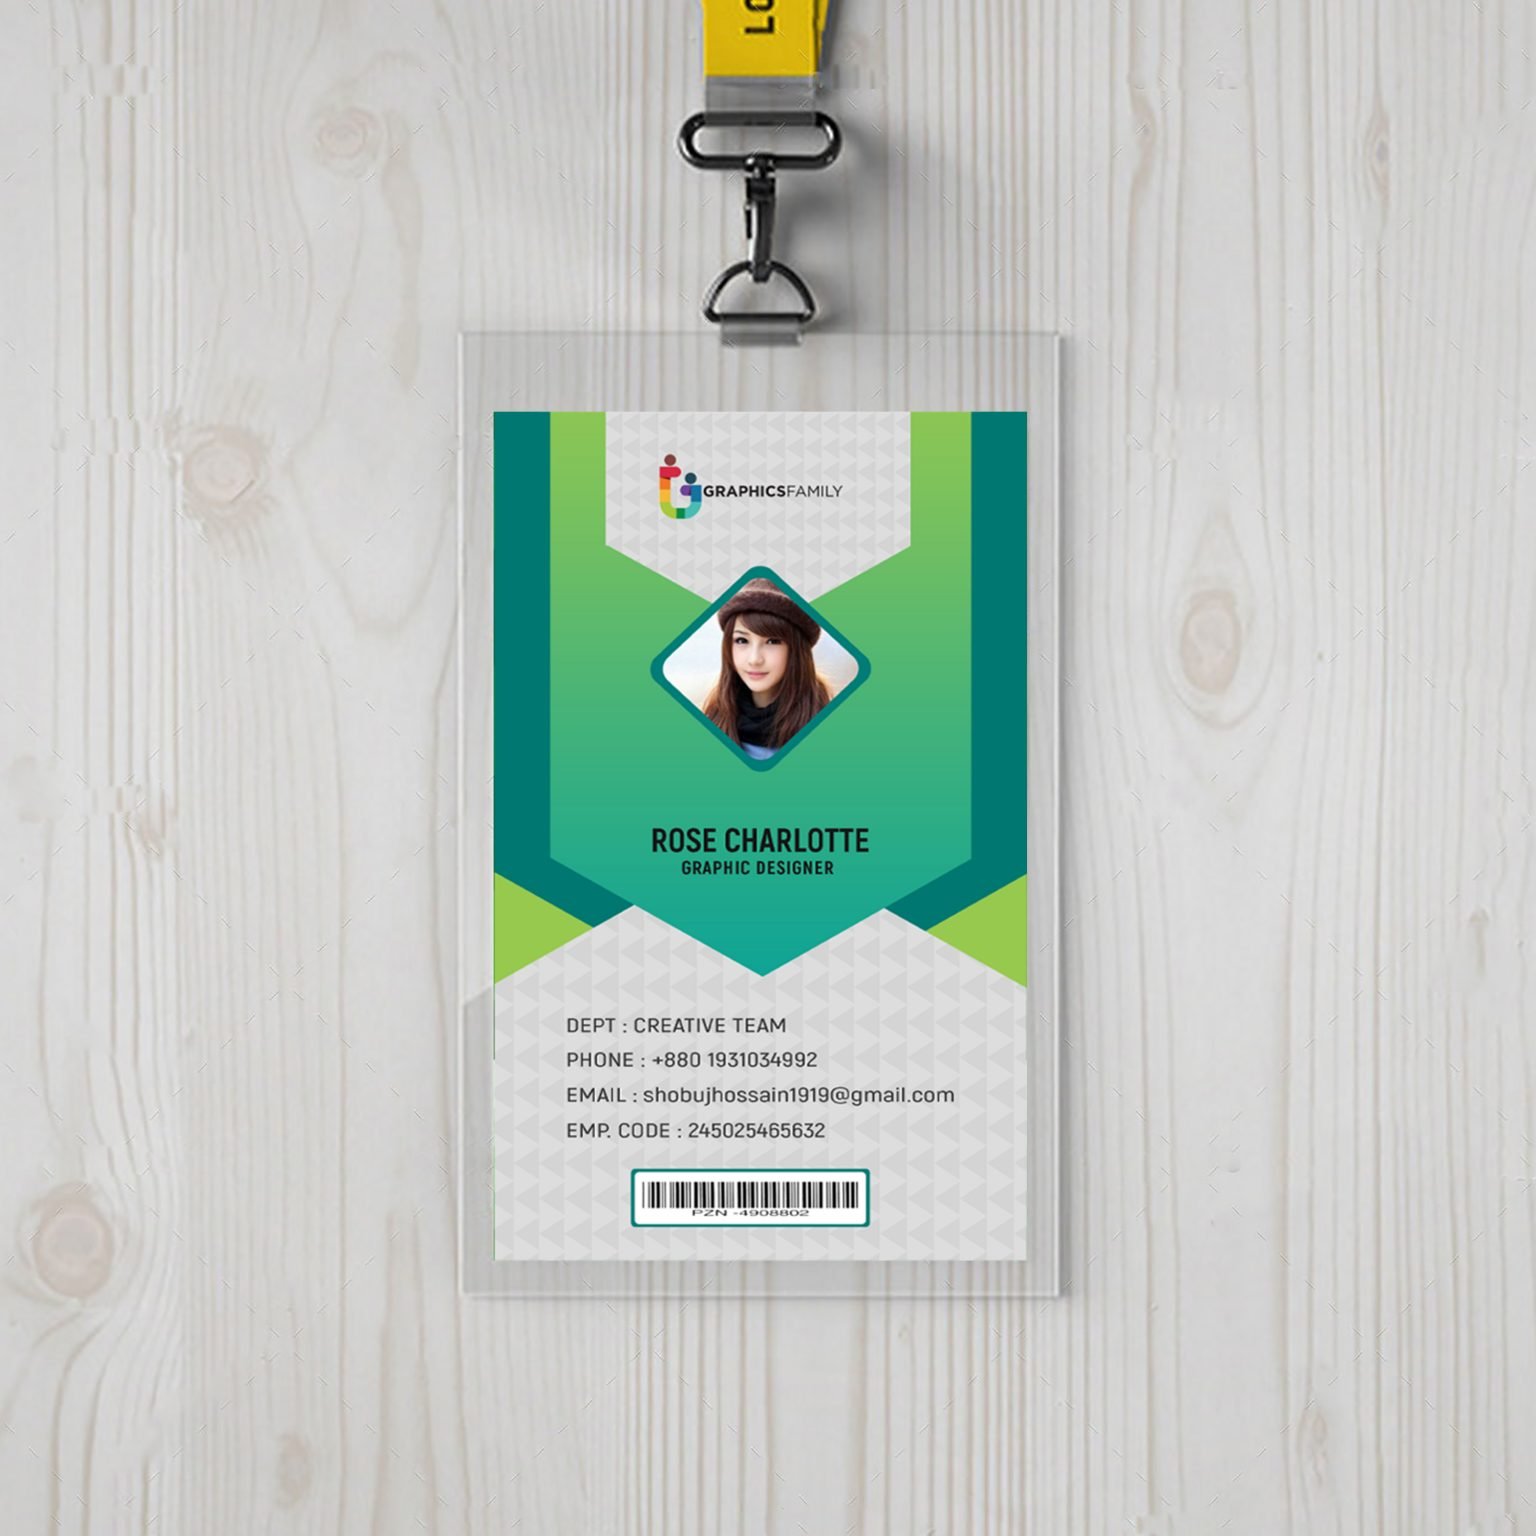 Modern Id Card Design Template Free psd GraphicsFamily